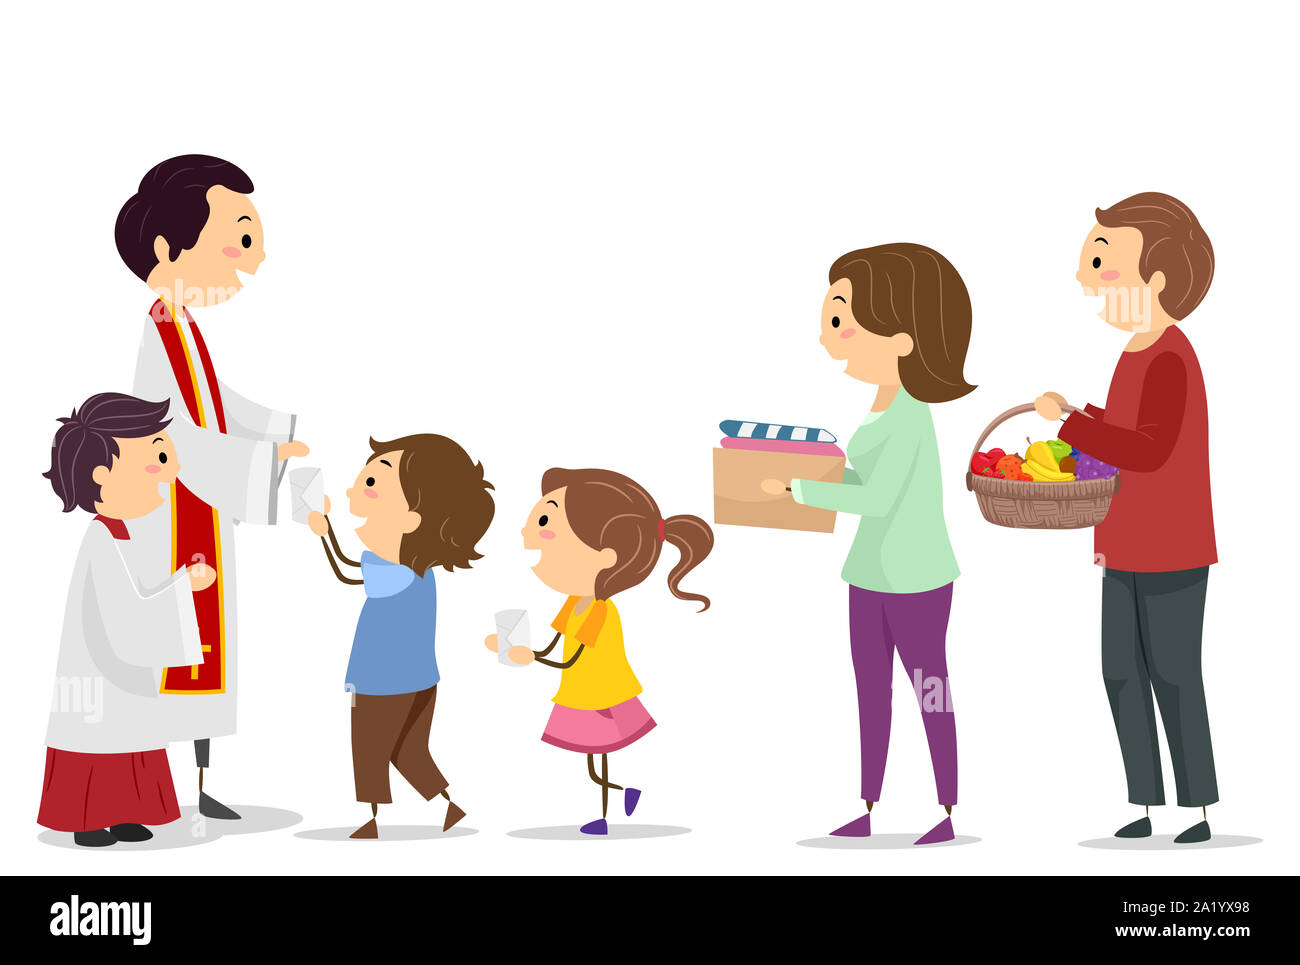 Illustration of Stickman Family Bringing Cash In Envelopes, Used Clothes and Basket of Fruits for Mass Offering Stock Photo